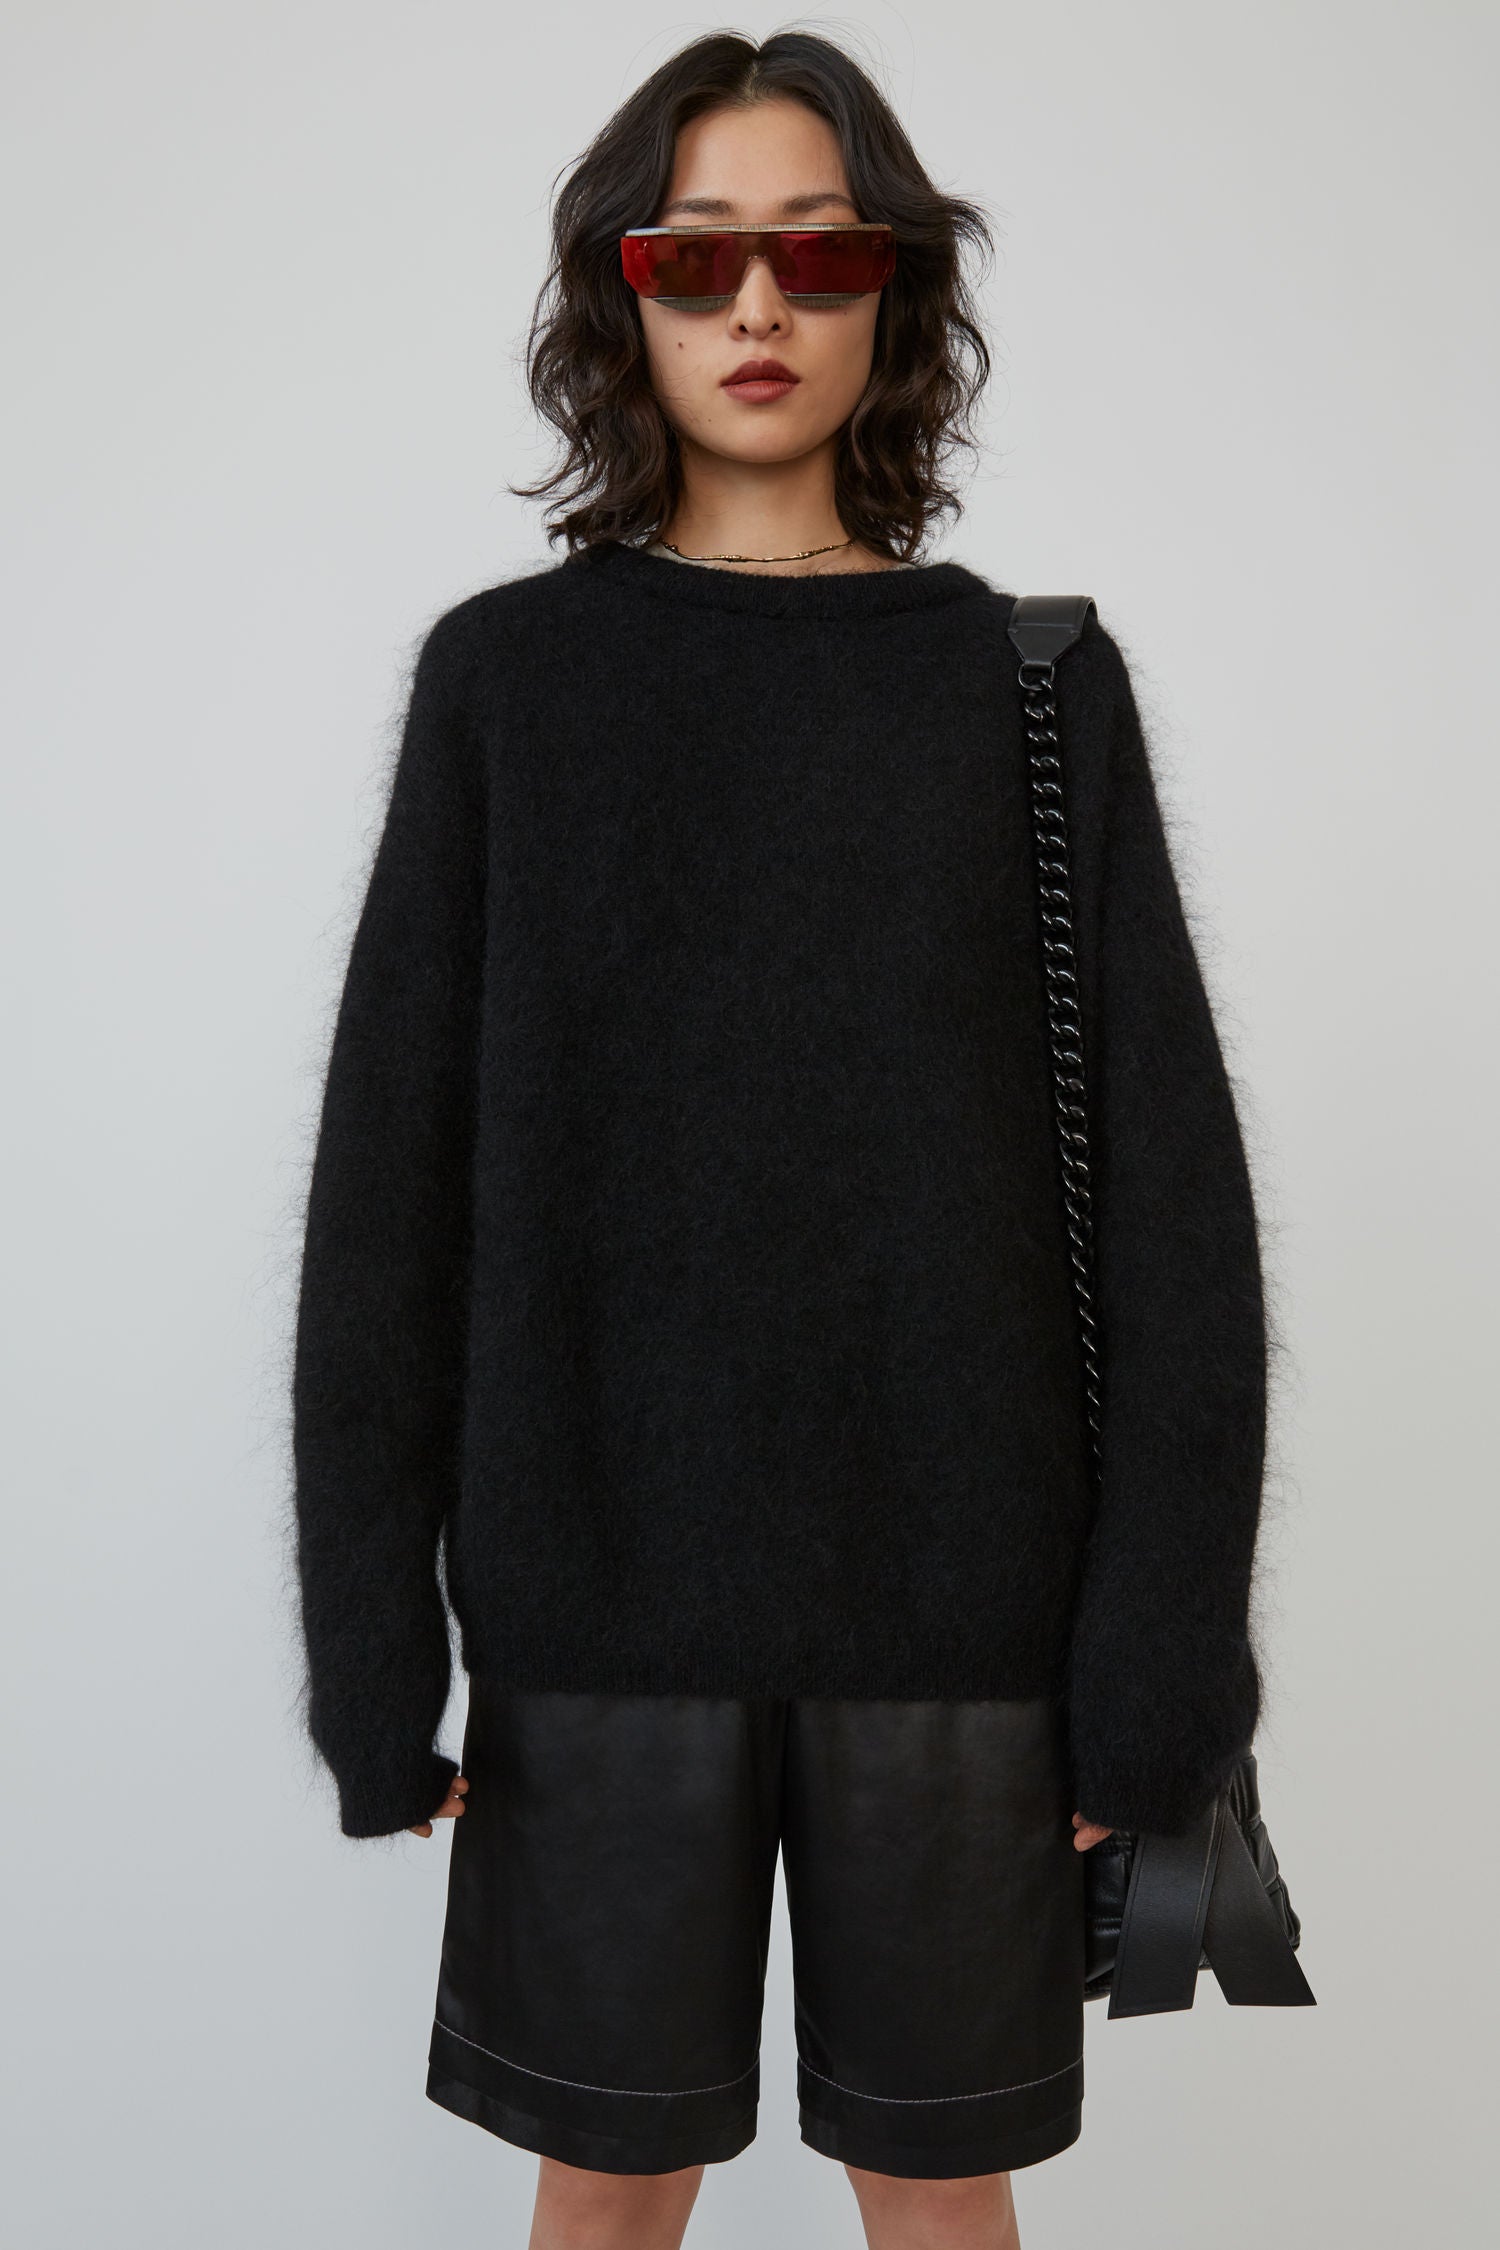 Best Black Sweaters For Women Going Out Or Staying Warm